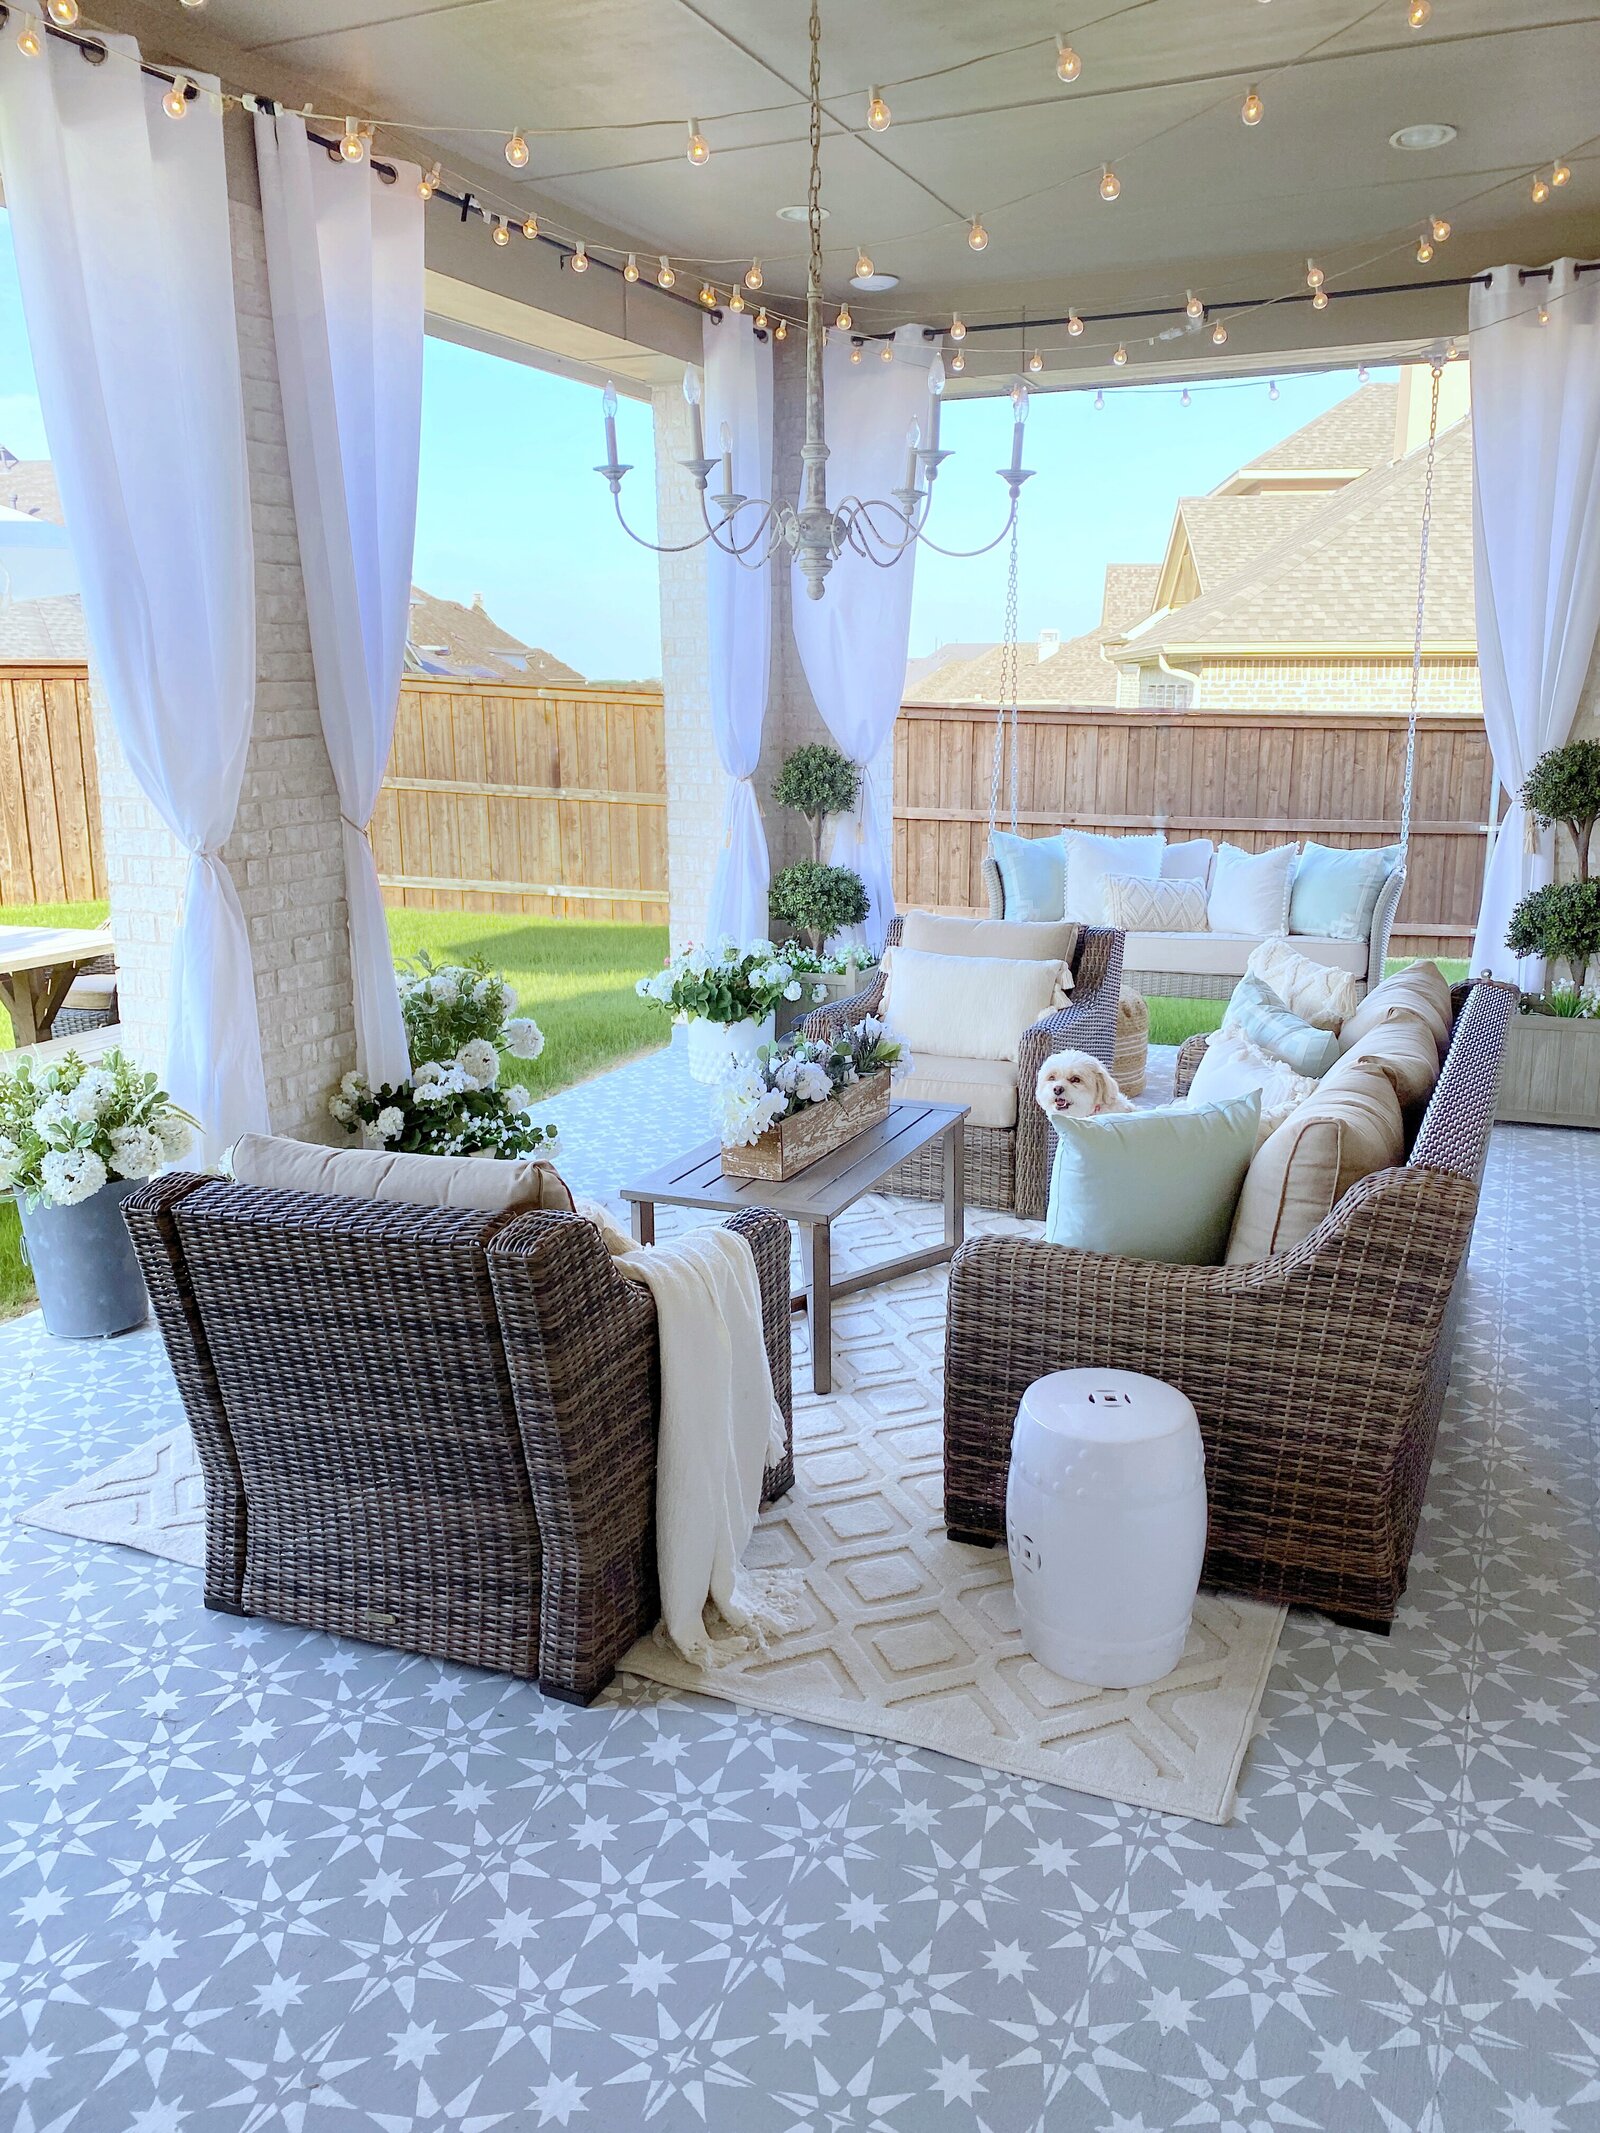 Outdoor patio decorated with MTH items and MTH drapes